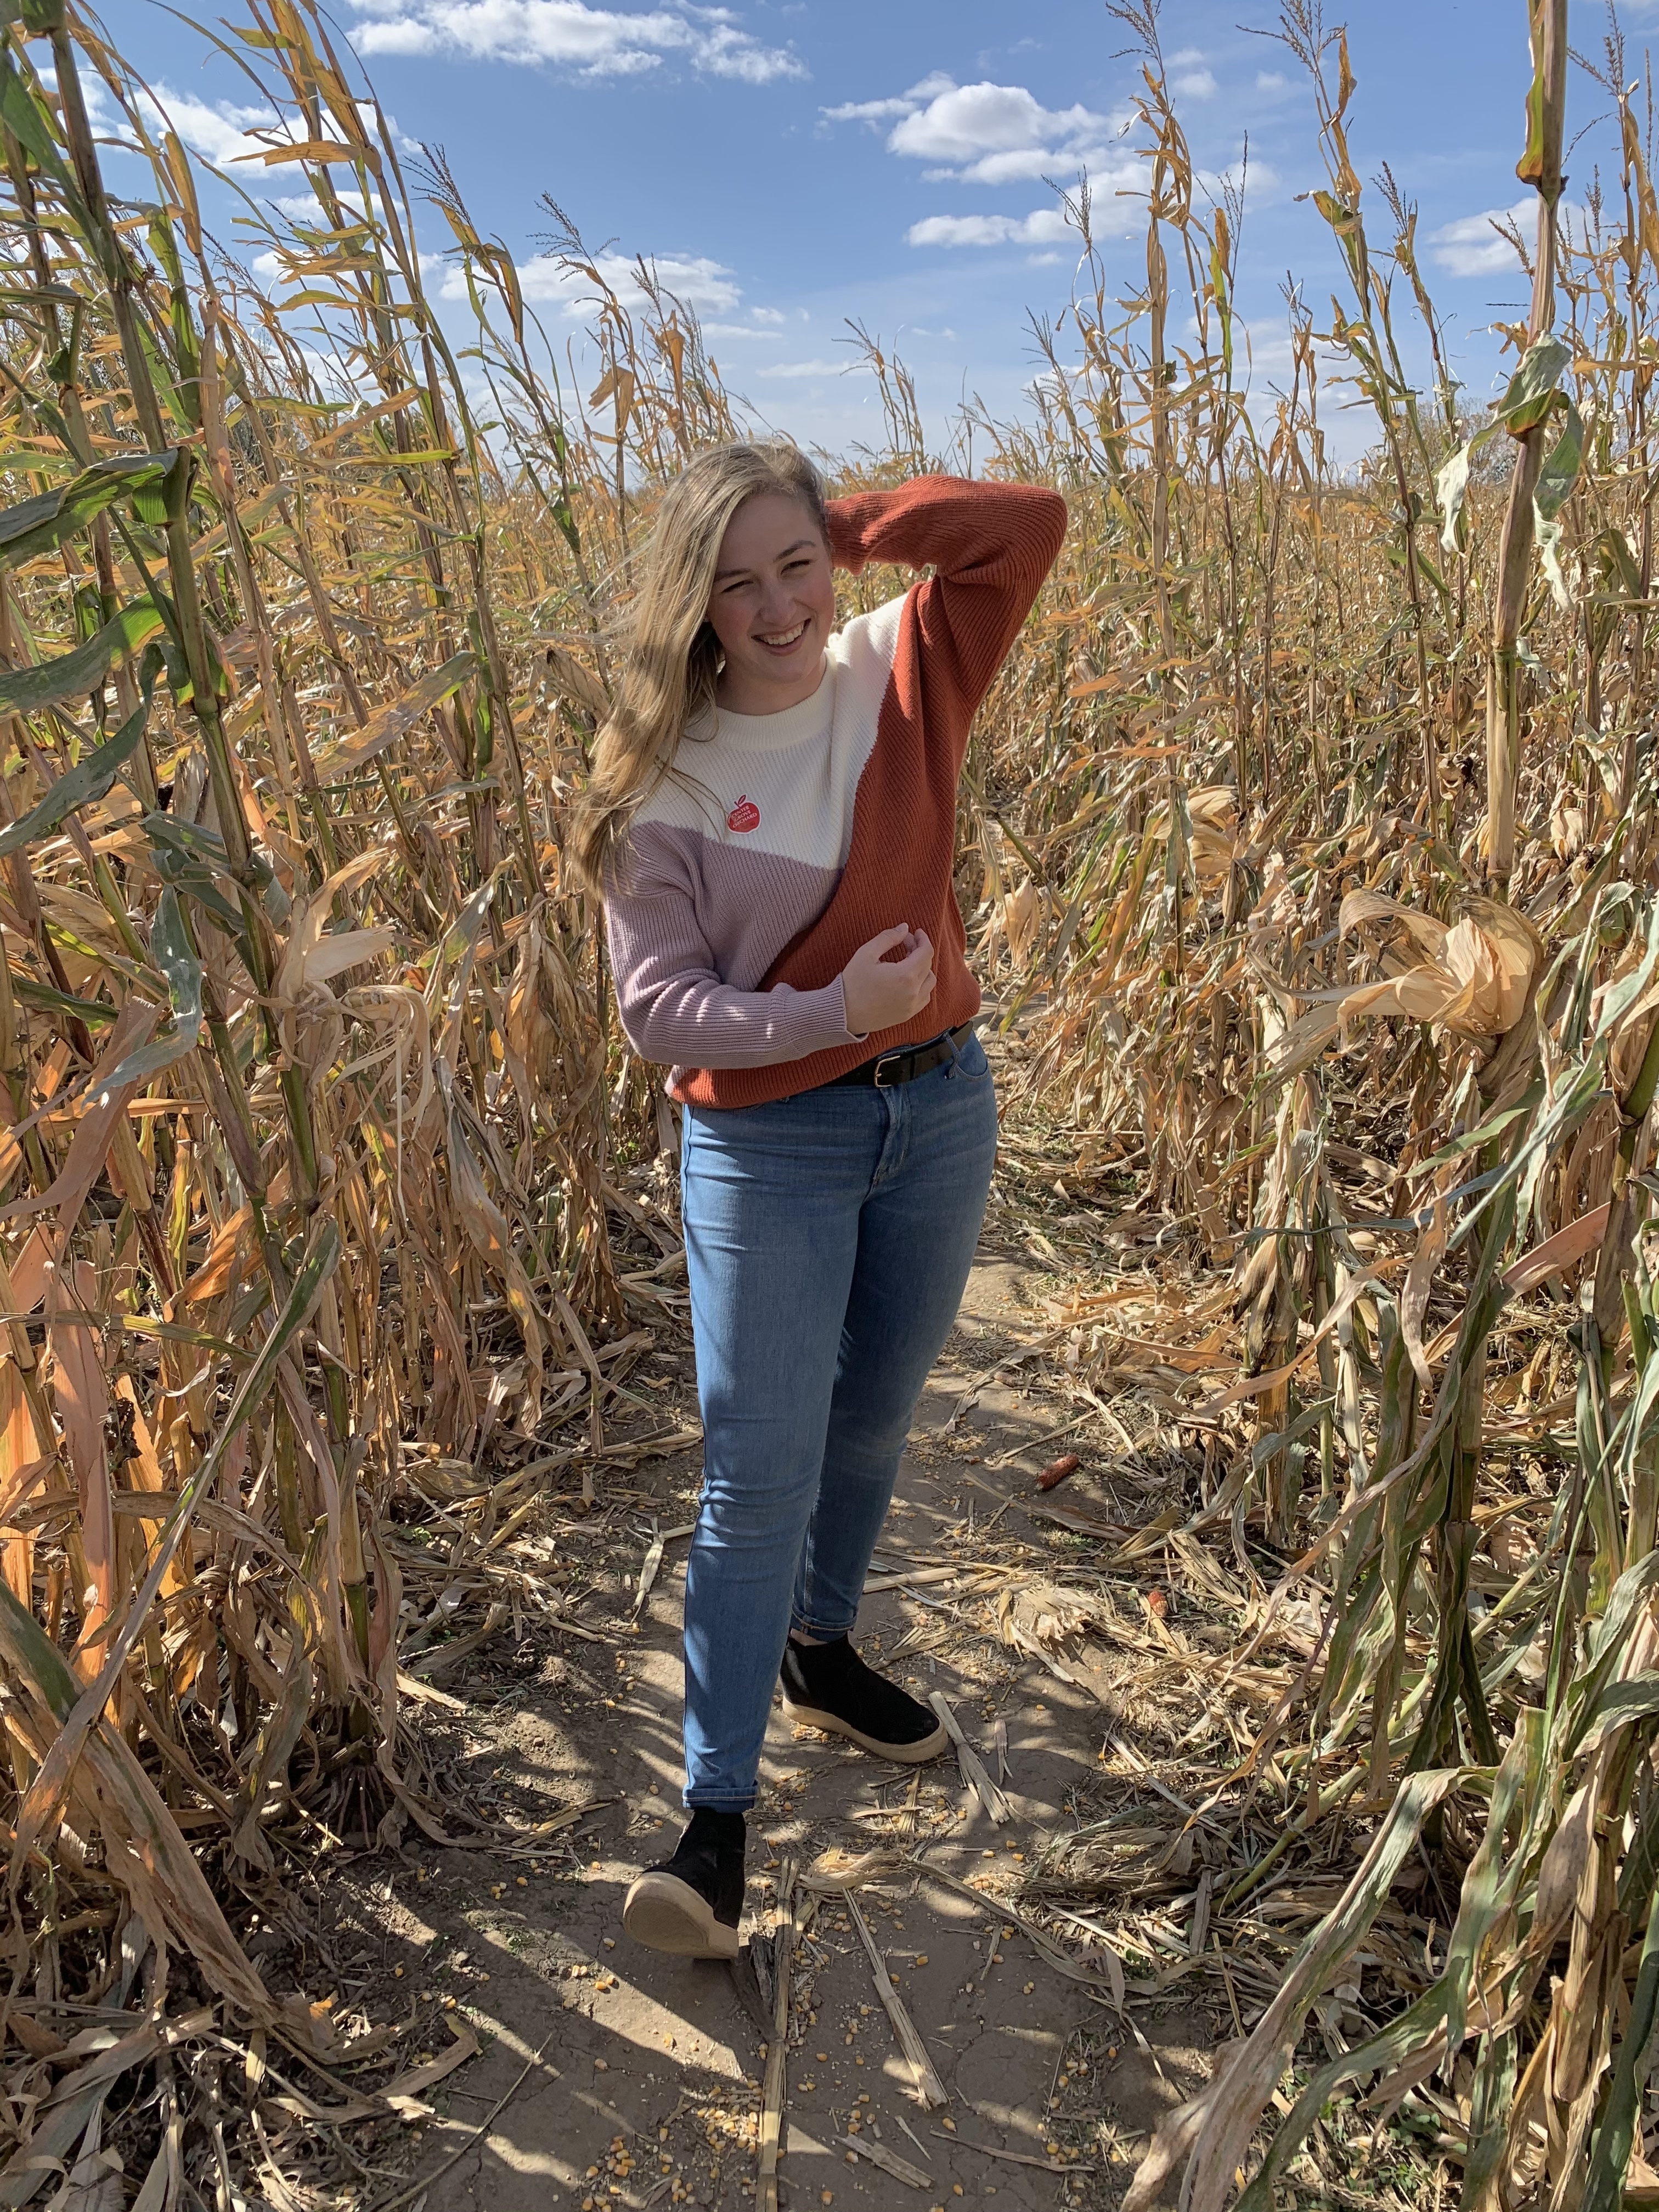 Hailey Zillig stands smiling in a corn field on a sunny autumn day